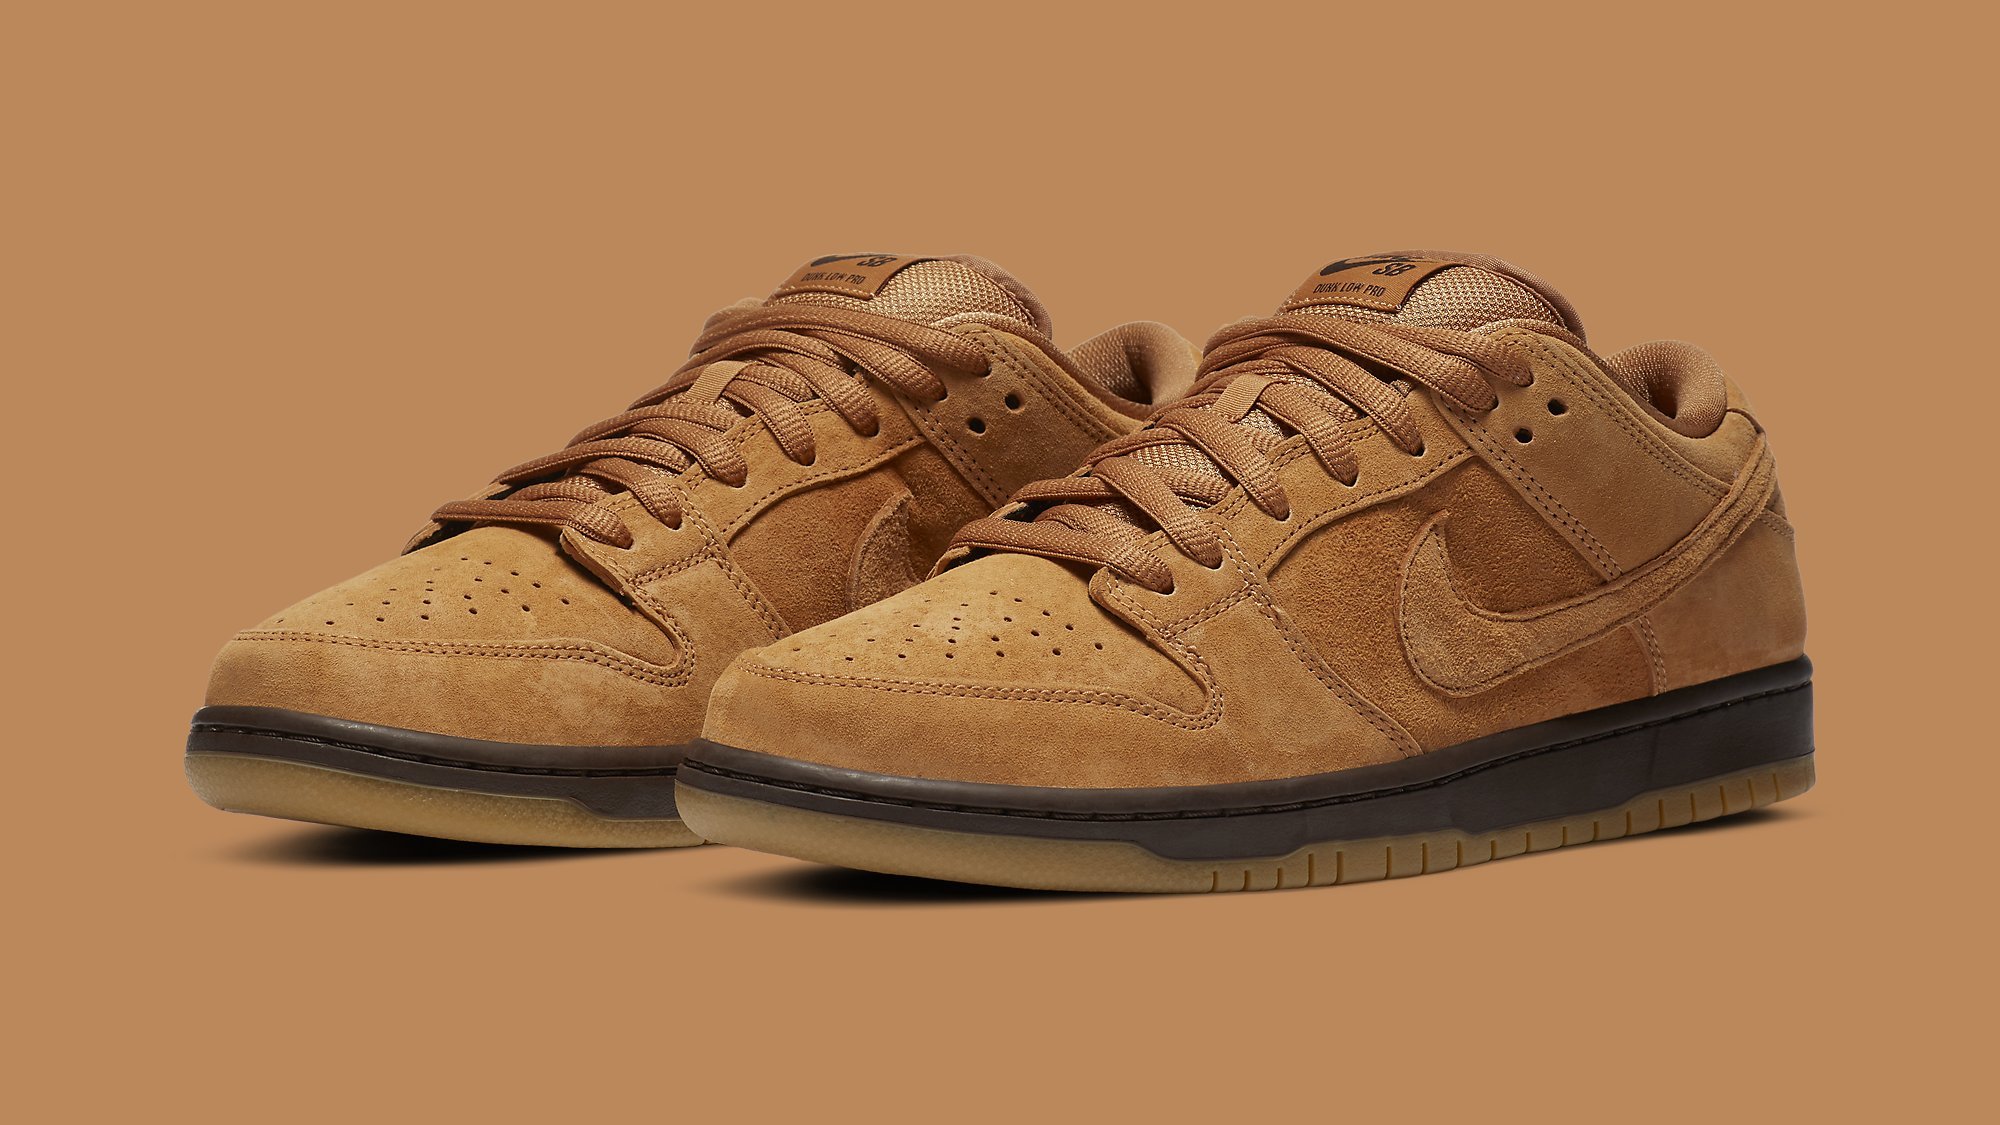 munt Monografie nationale vlag Detailed Look at the 'Wheat Mocha' Nike SB Dunk Low | Complex